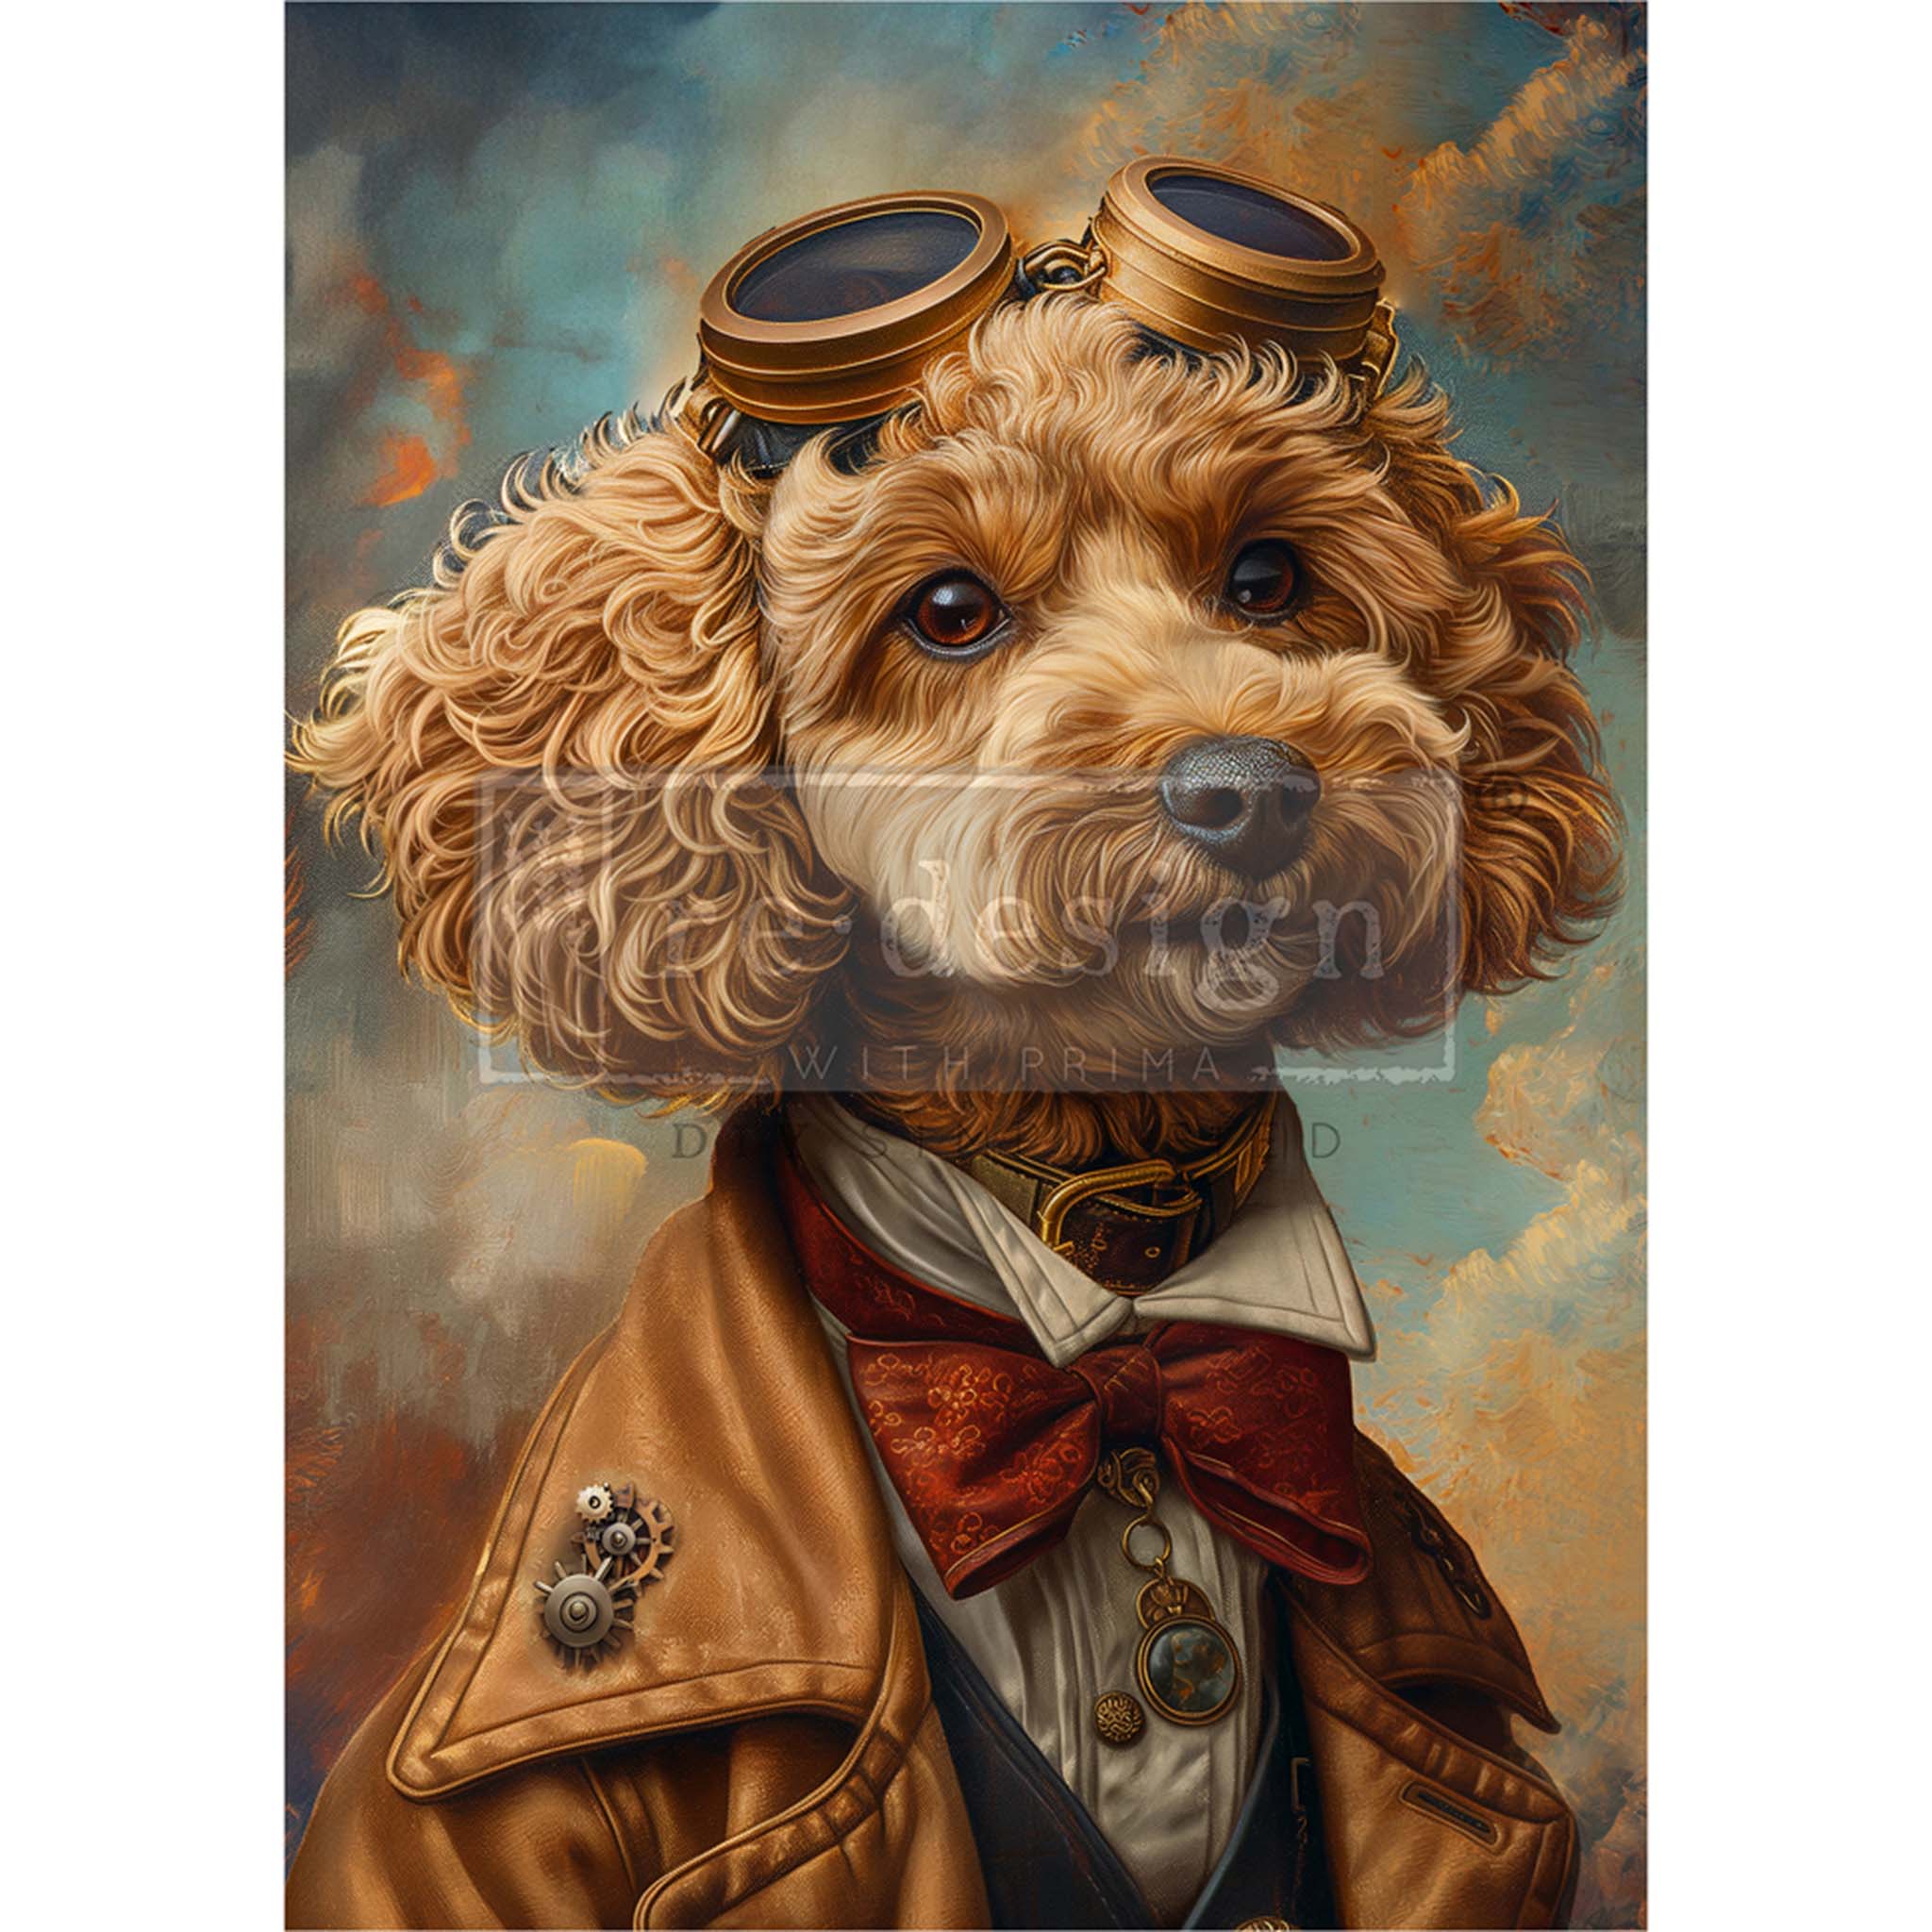 A1 fiber paper featuring a whimsical portrait of a dog against a cloudy sky backdrop and is wearing a Steampunk style flight suit with pilot goggles on its head. White borders are on the sides.